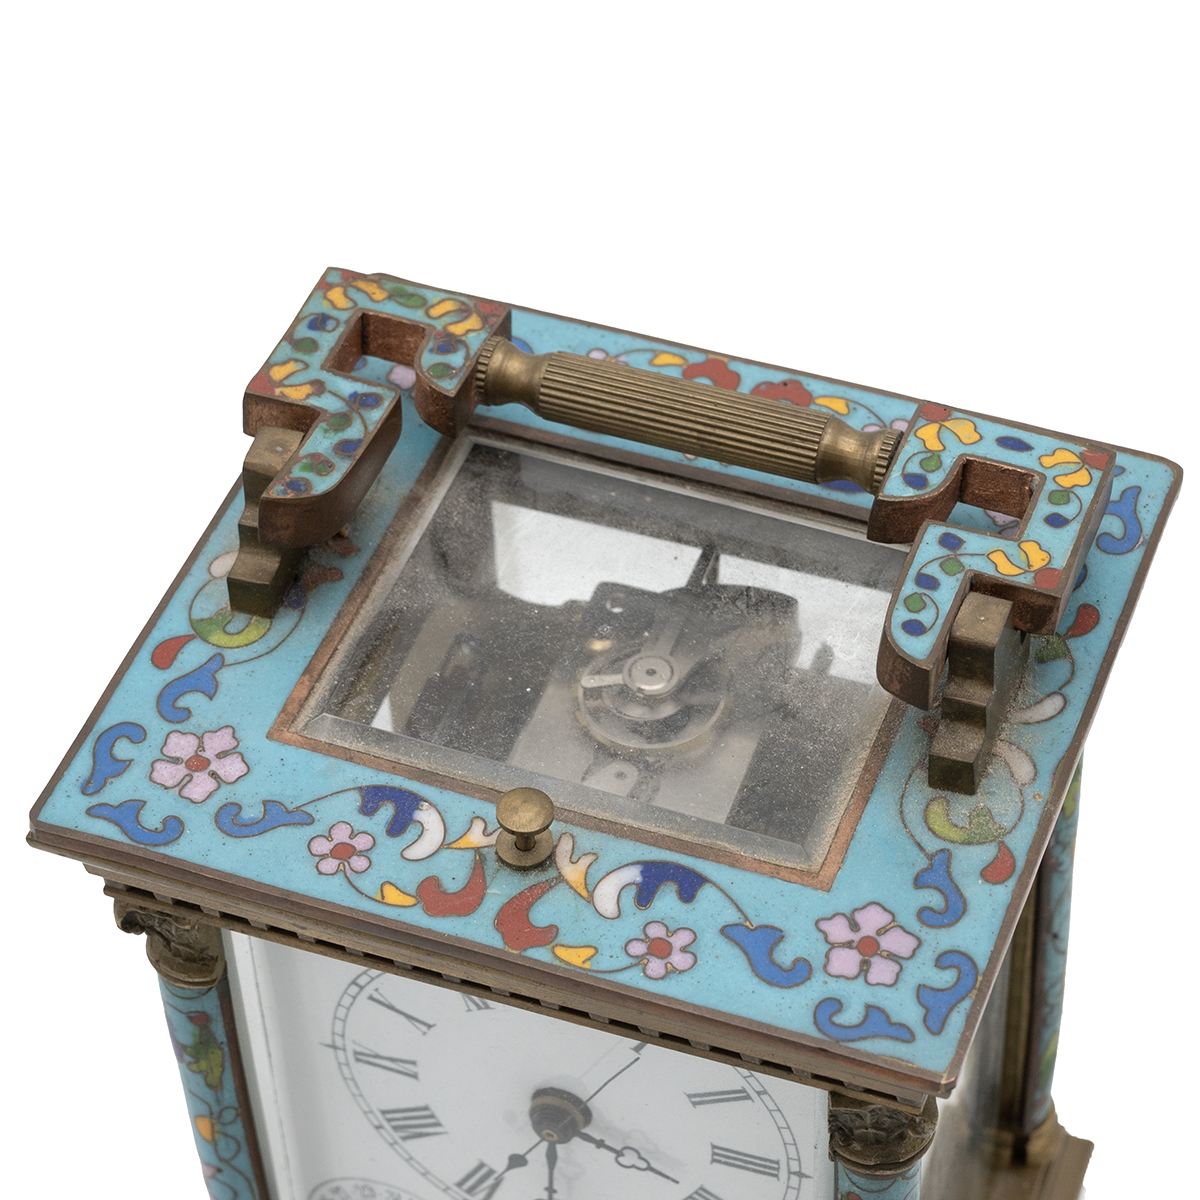 20th century brass and enamel carriage clock with repeater and alarm function and day of week and... - Image 5 of 5